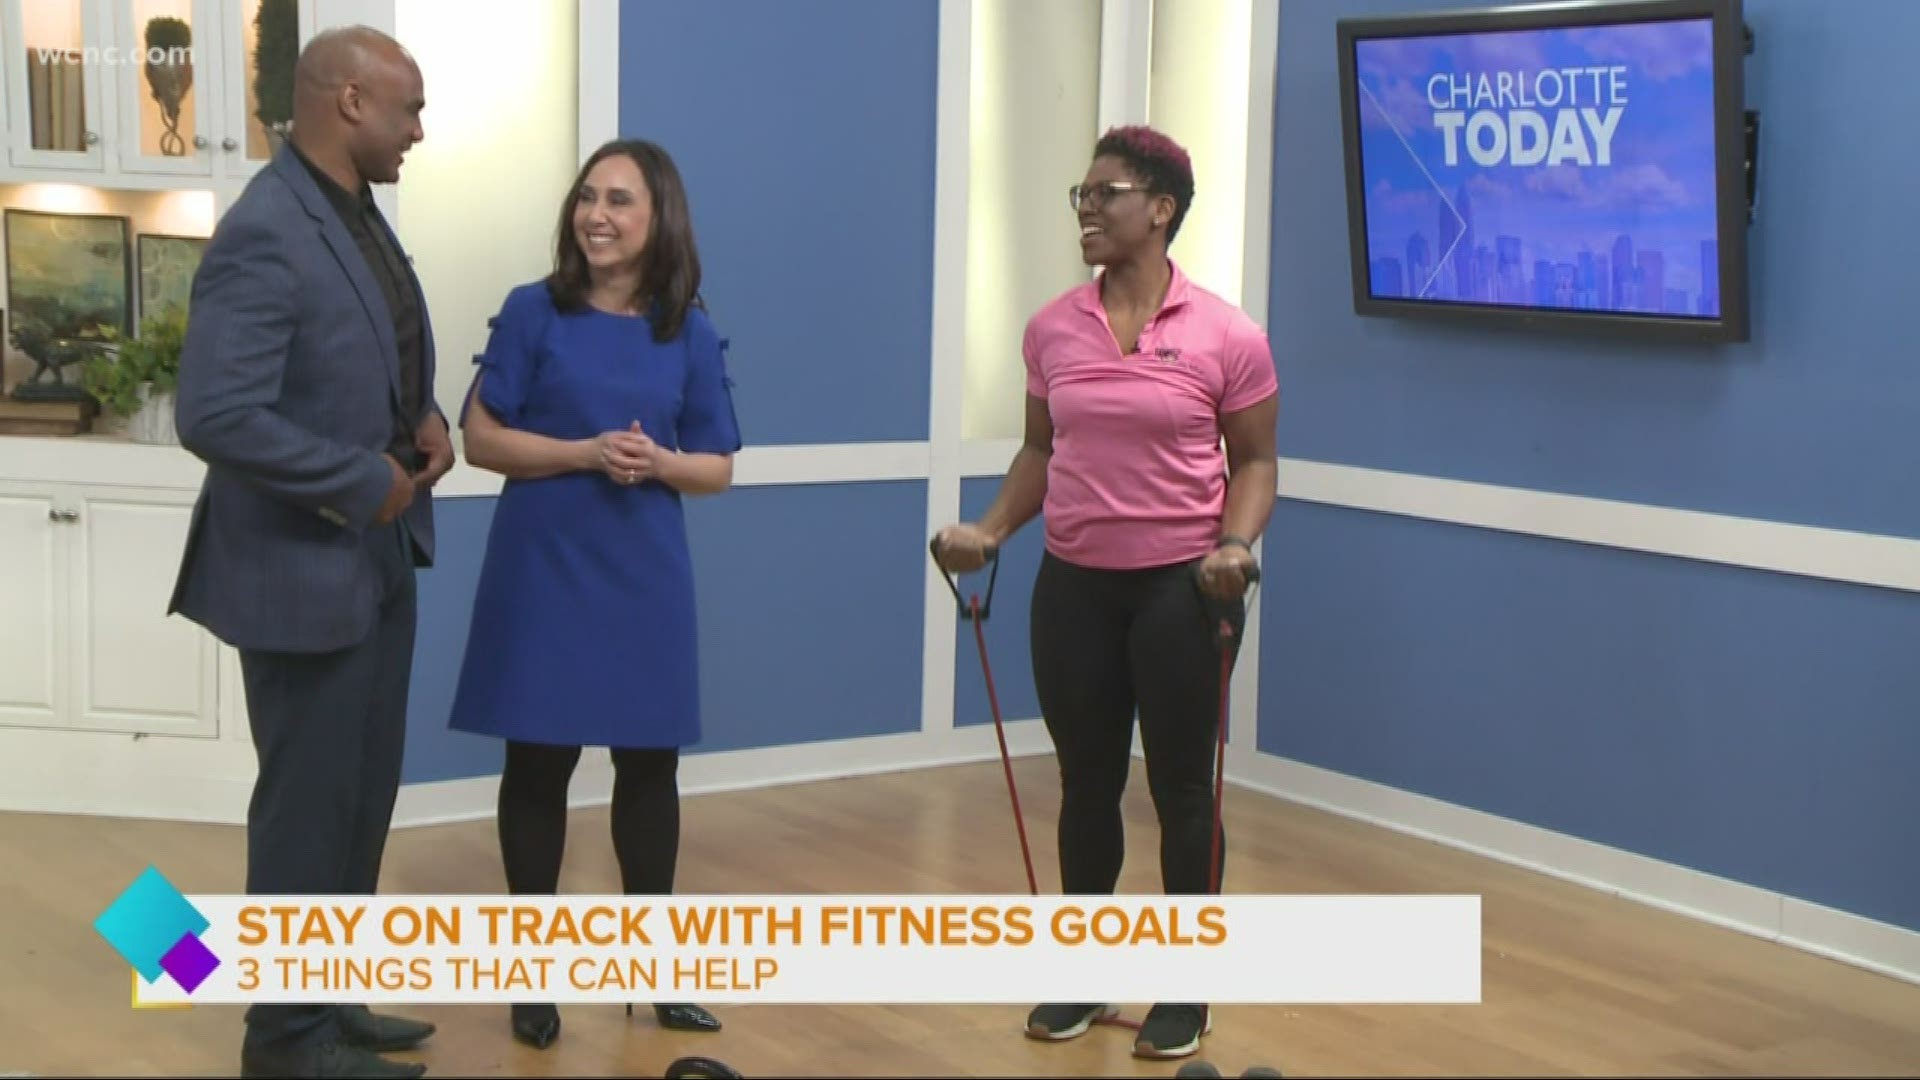 Trainer Tamara Brown shares ways to keep your fitness goals on track.